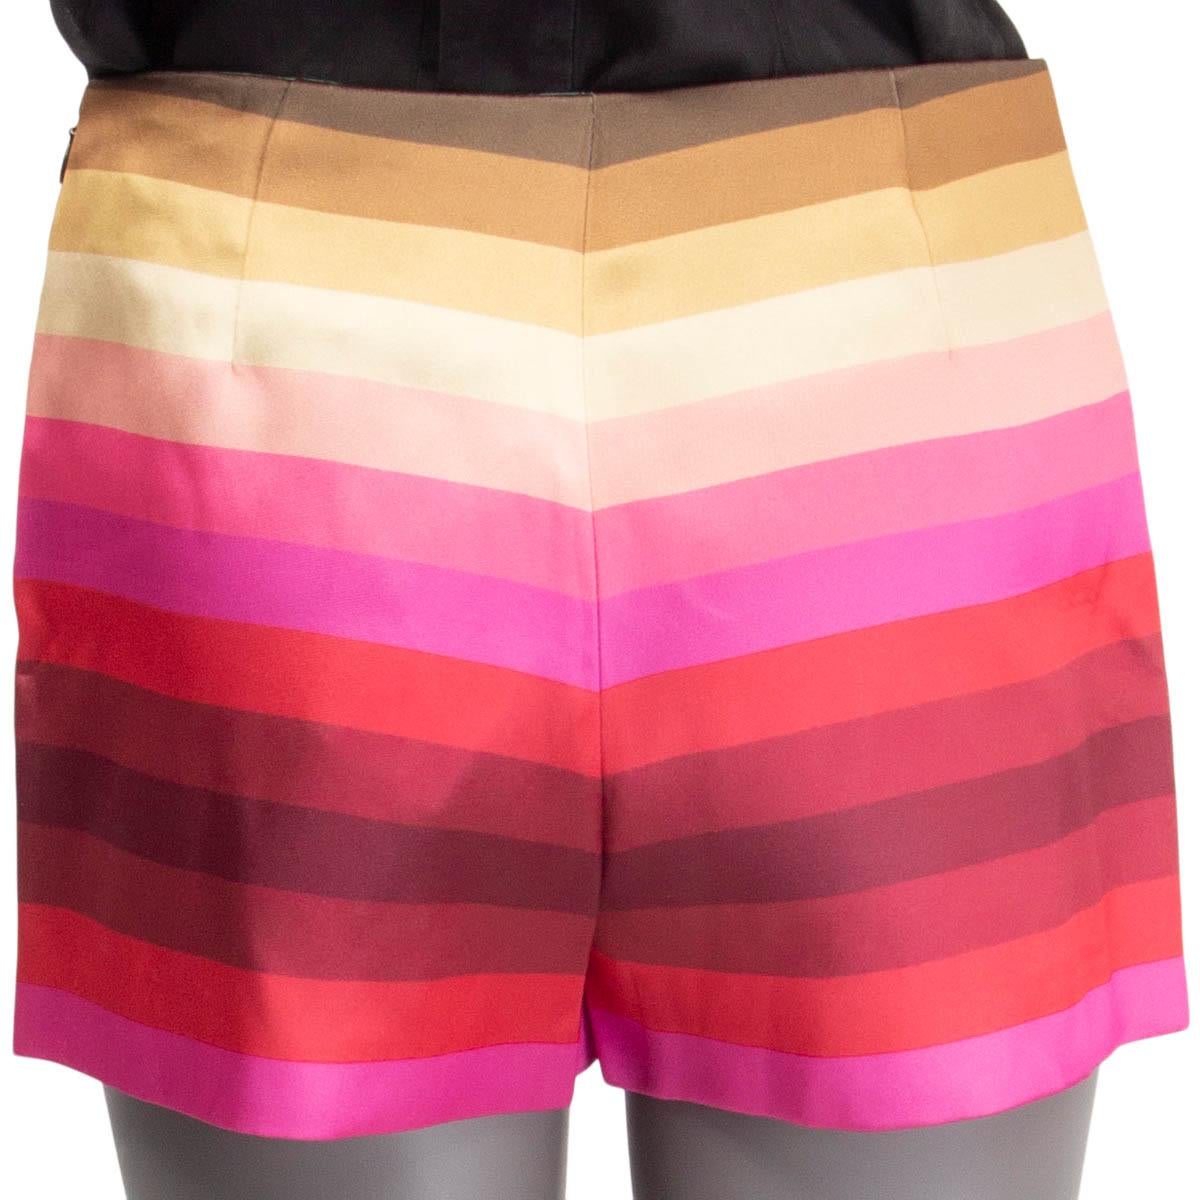 pink and white striped shorts